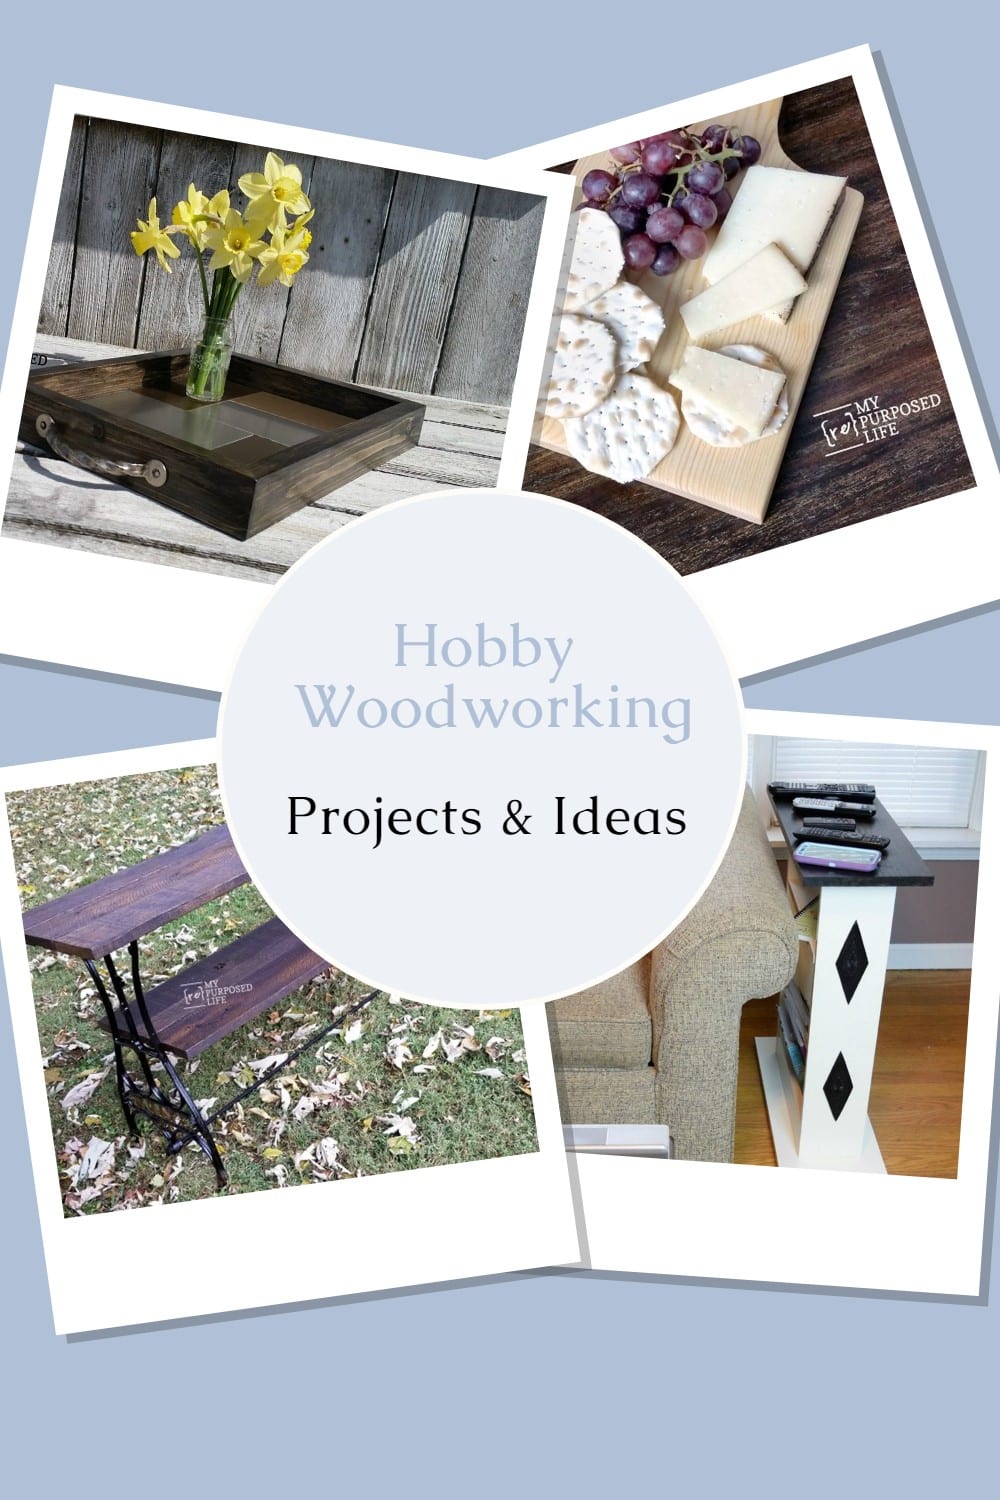 Woodworking projects for all skill levels. Tips for first tools, everything you need to know to start a hobby in woodworking. via @repurposedlife